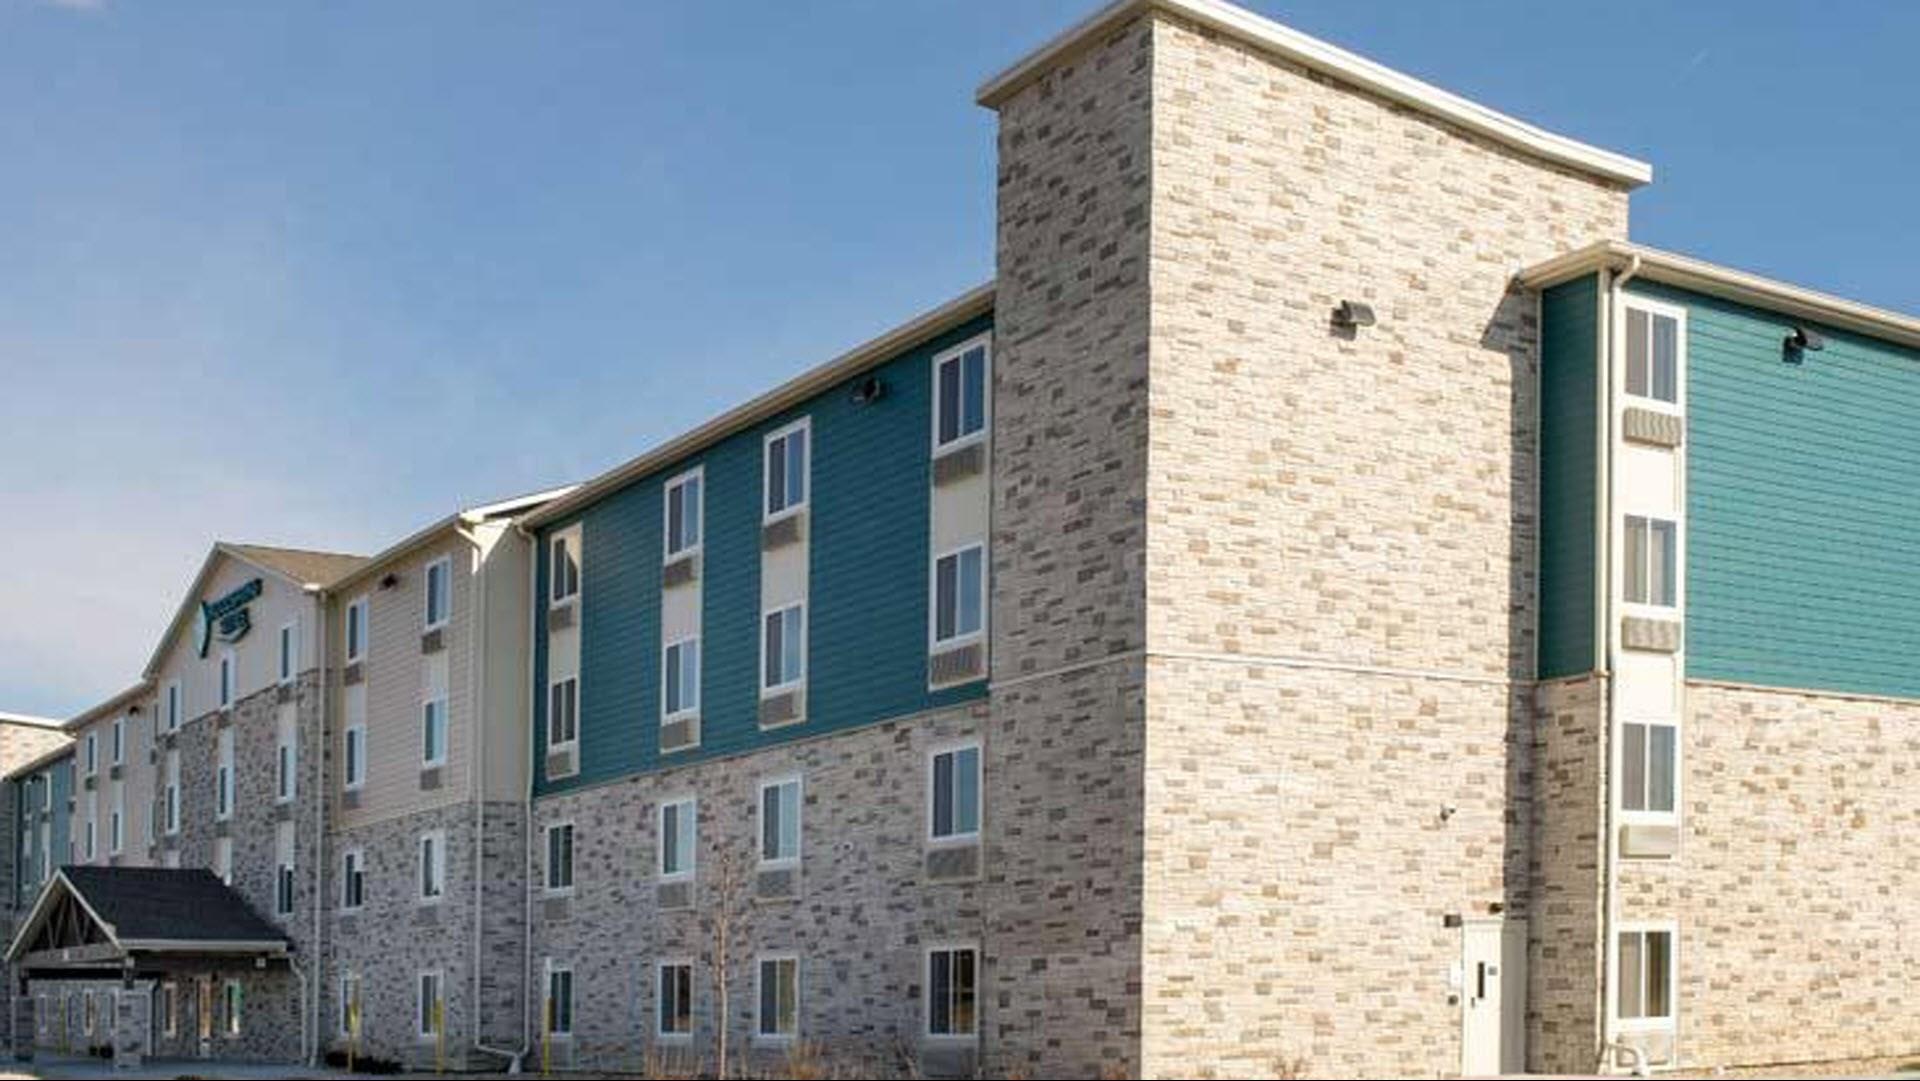 WoodSpring Suites Chicago Tinley Park in Tinley Park, IL